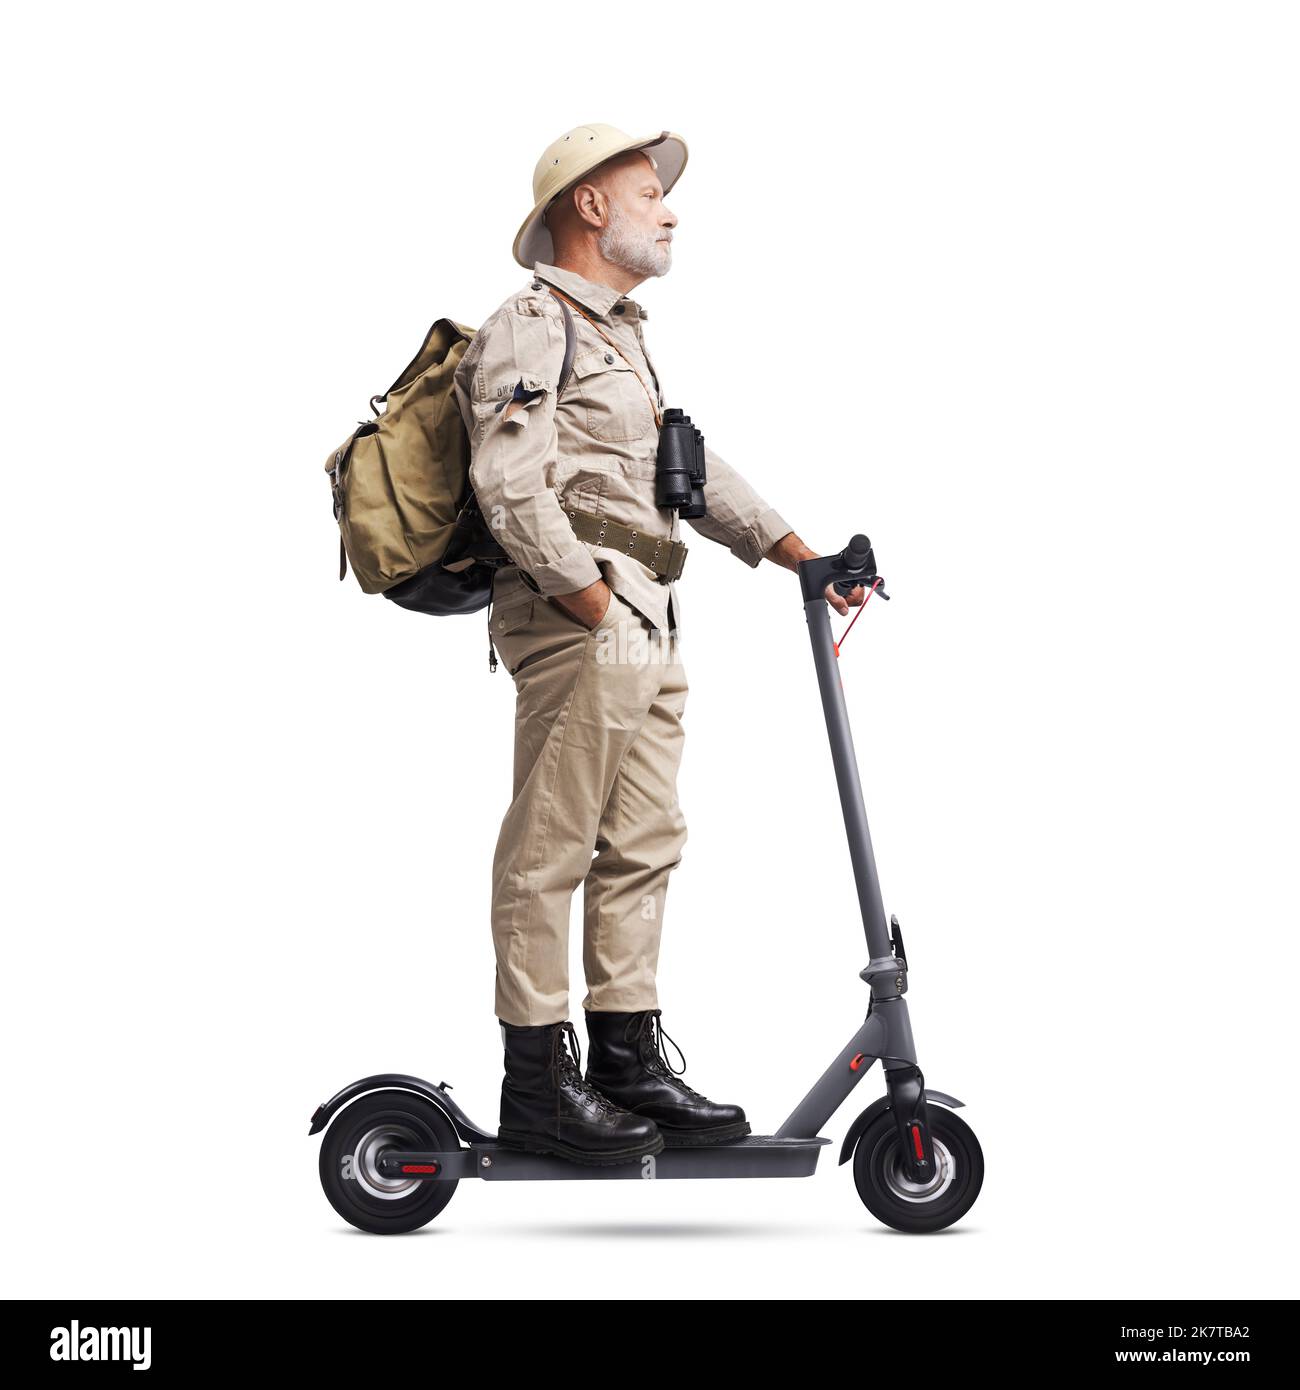 Confident vintage style explorer riding an electric scooter, isolated on white background Stock Photo